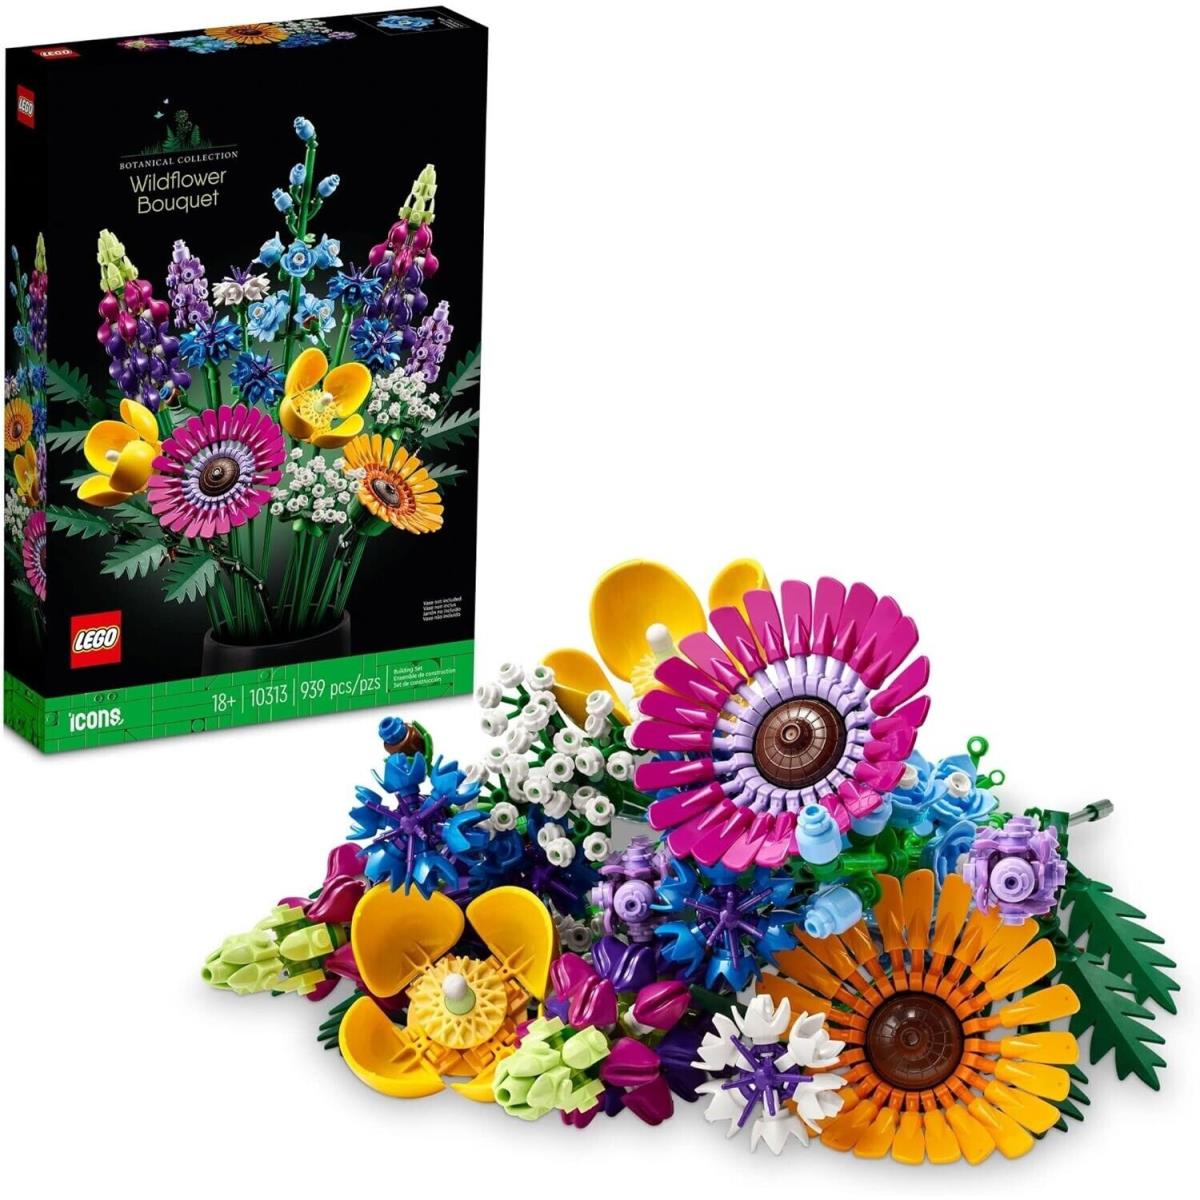 Lego Icons Botanical Collection Wildflower Bouquet 10313 Building Toy Set